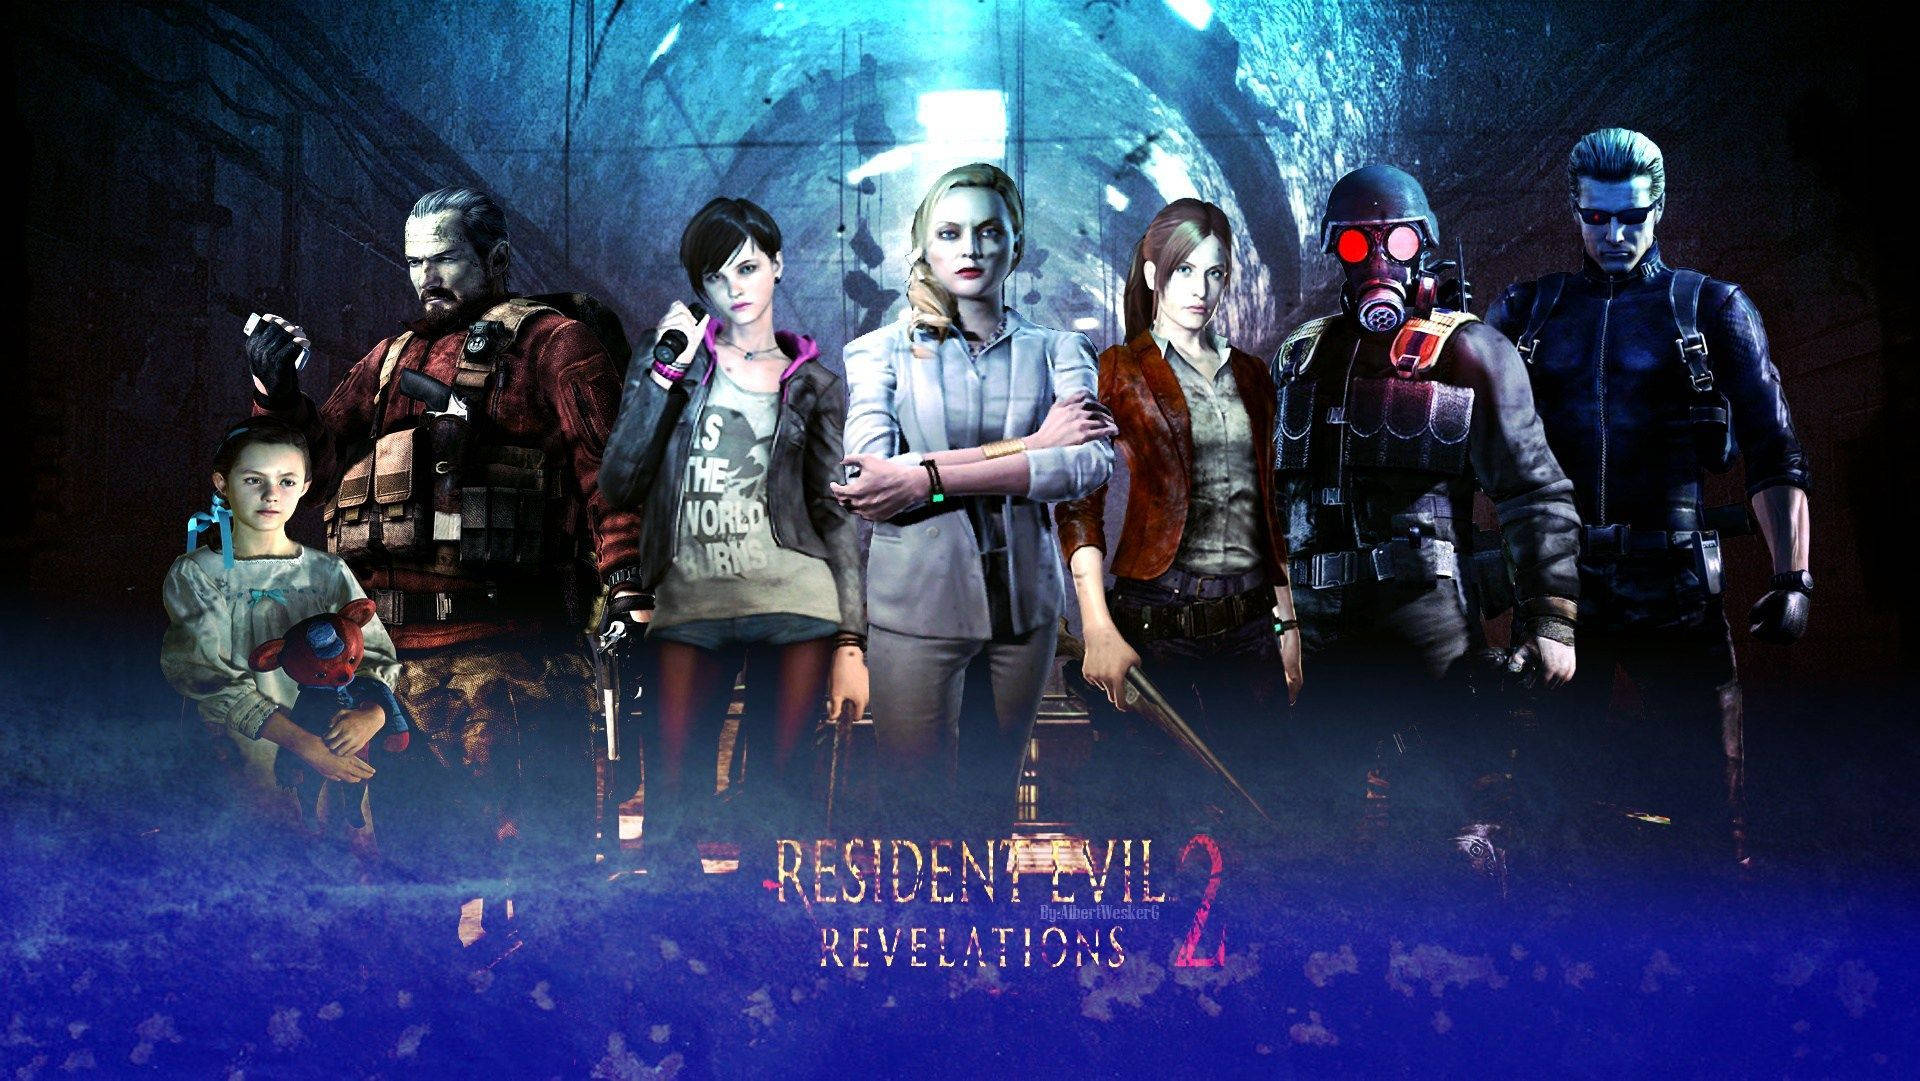 Resident Evil 2 Revelations Characters In Blue Background